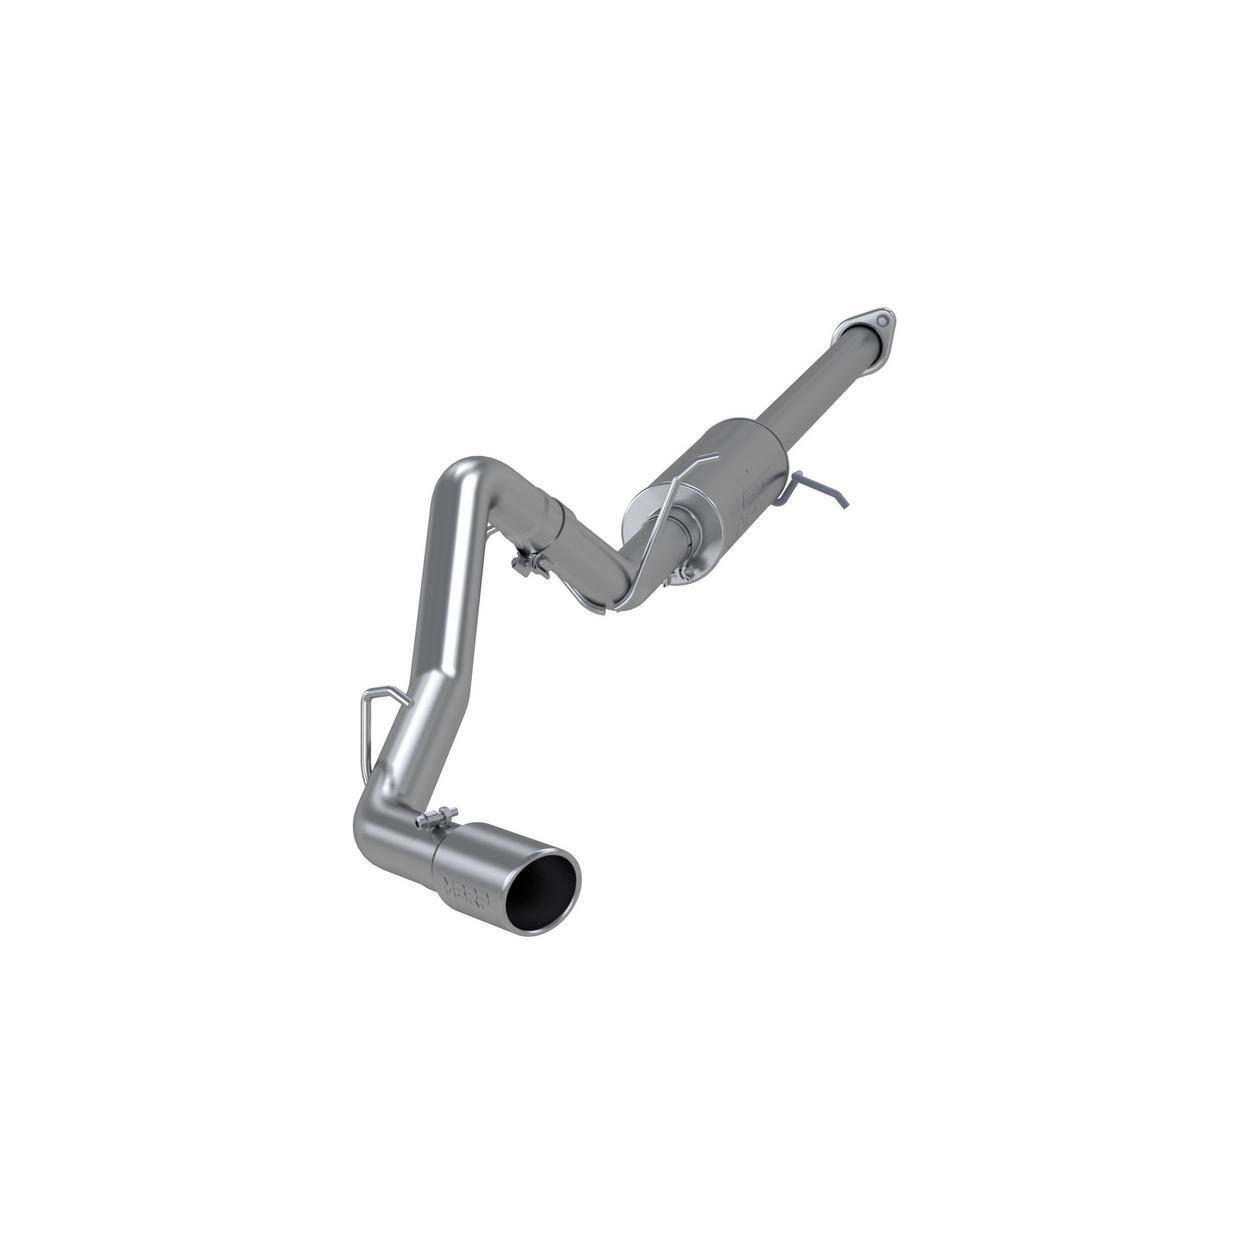 MBRP Exhaust S5036AL-IM Exhaust System Kit for 2008 Chevrolet Silverado 1500